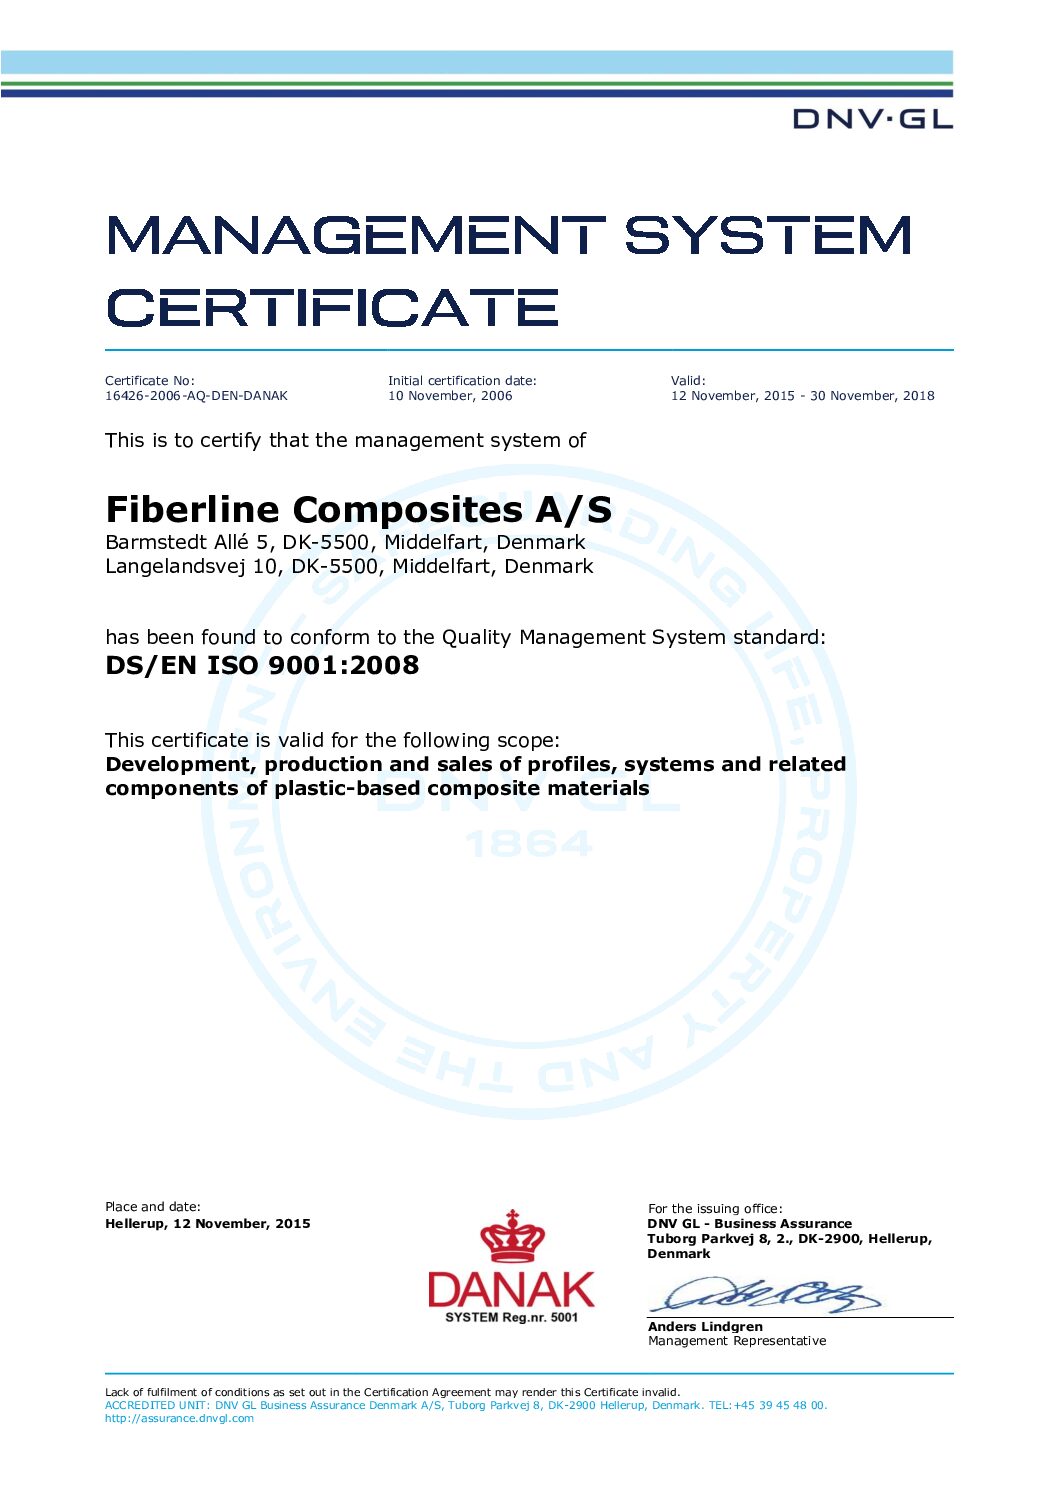 Management System Certificate 2008